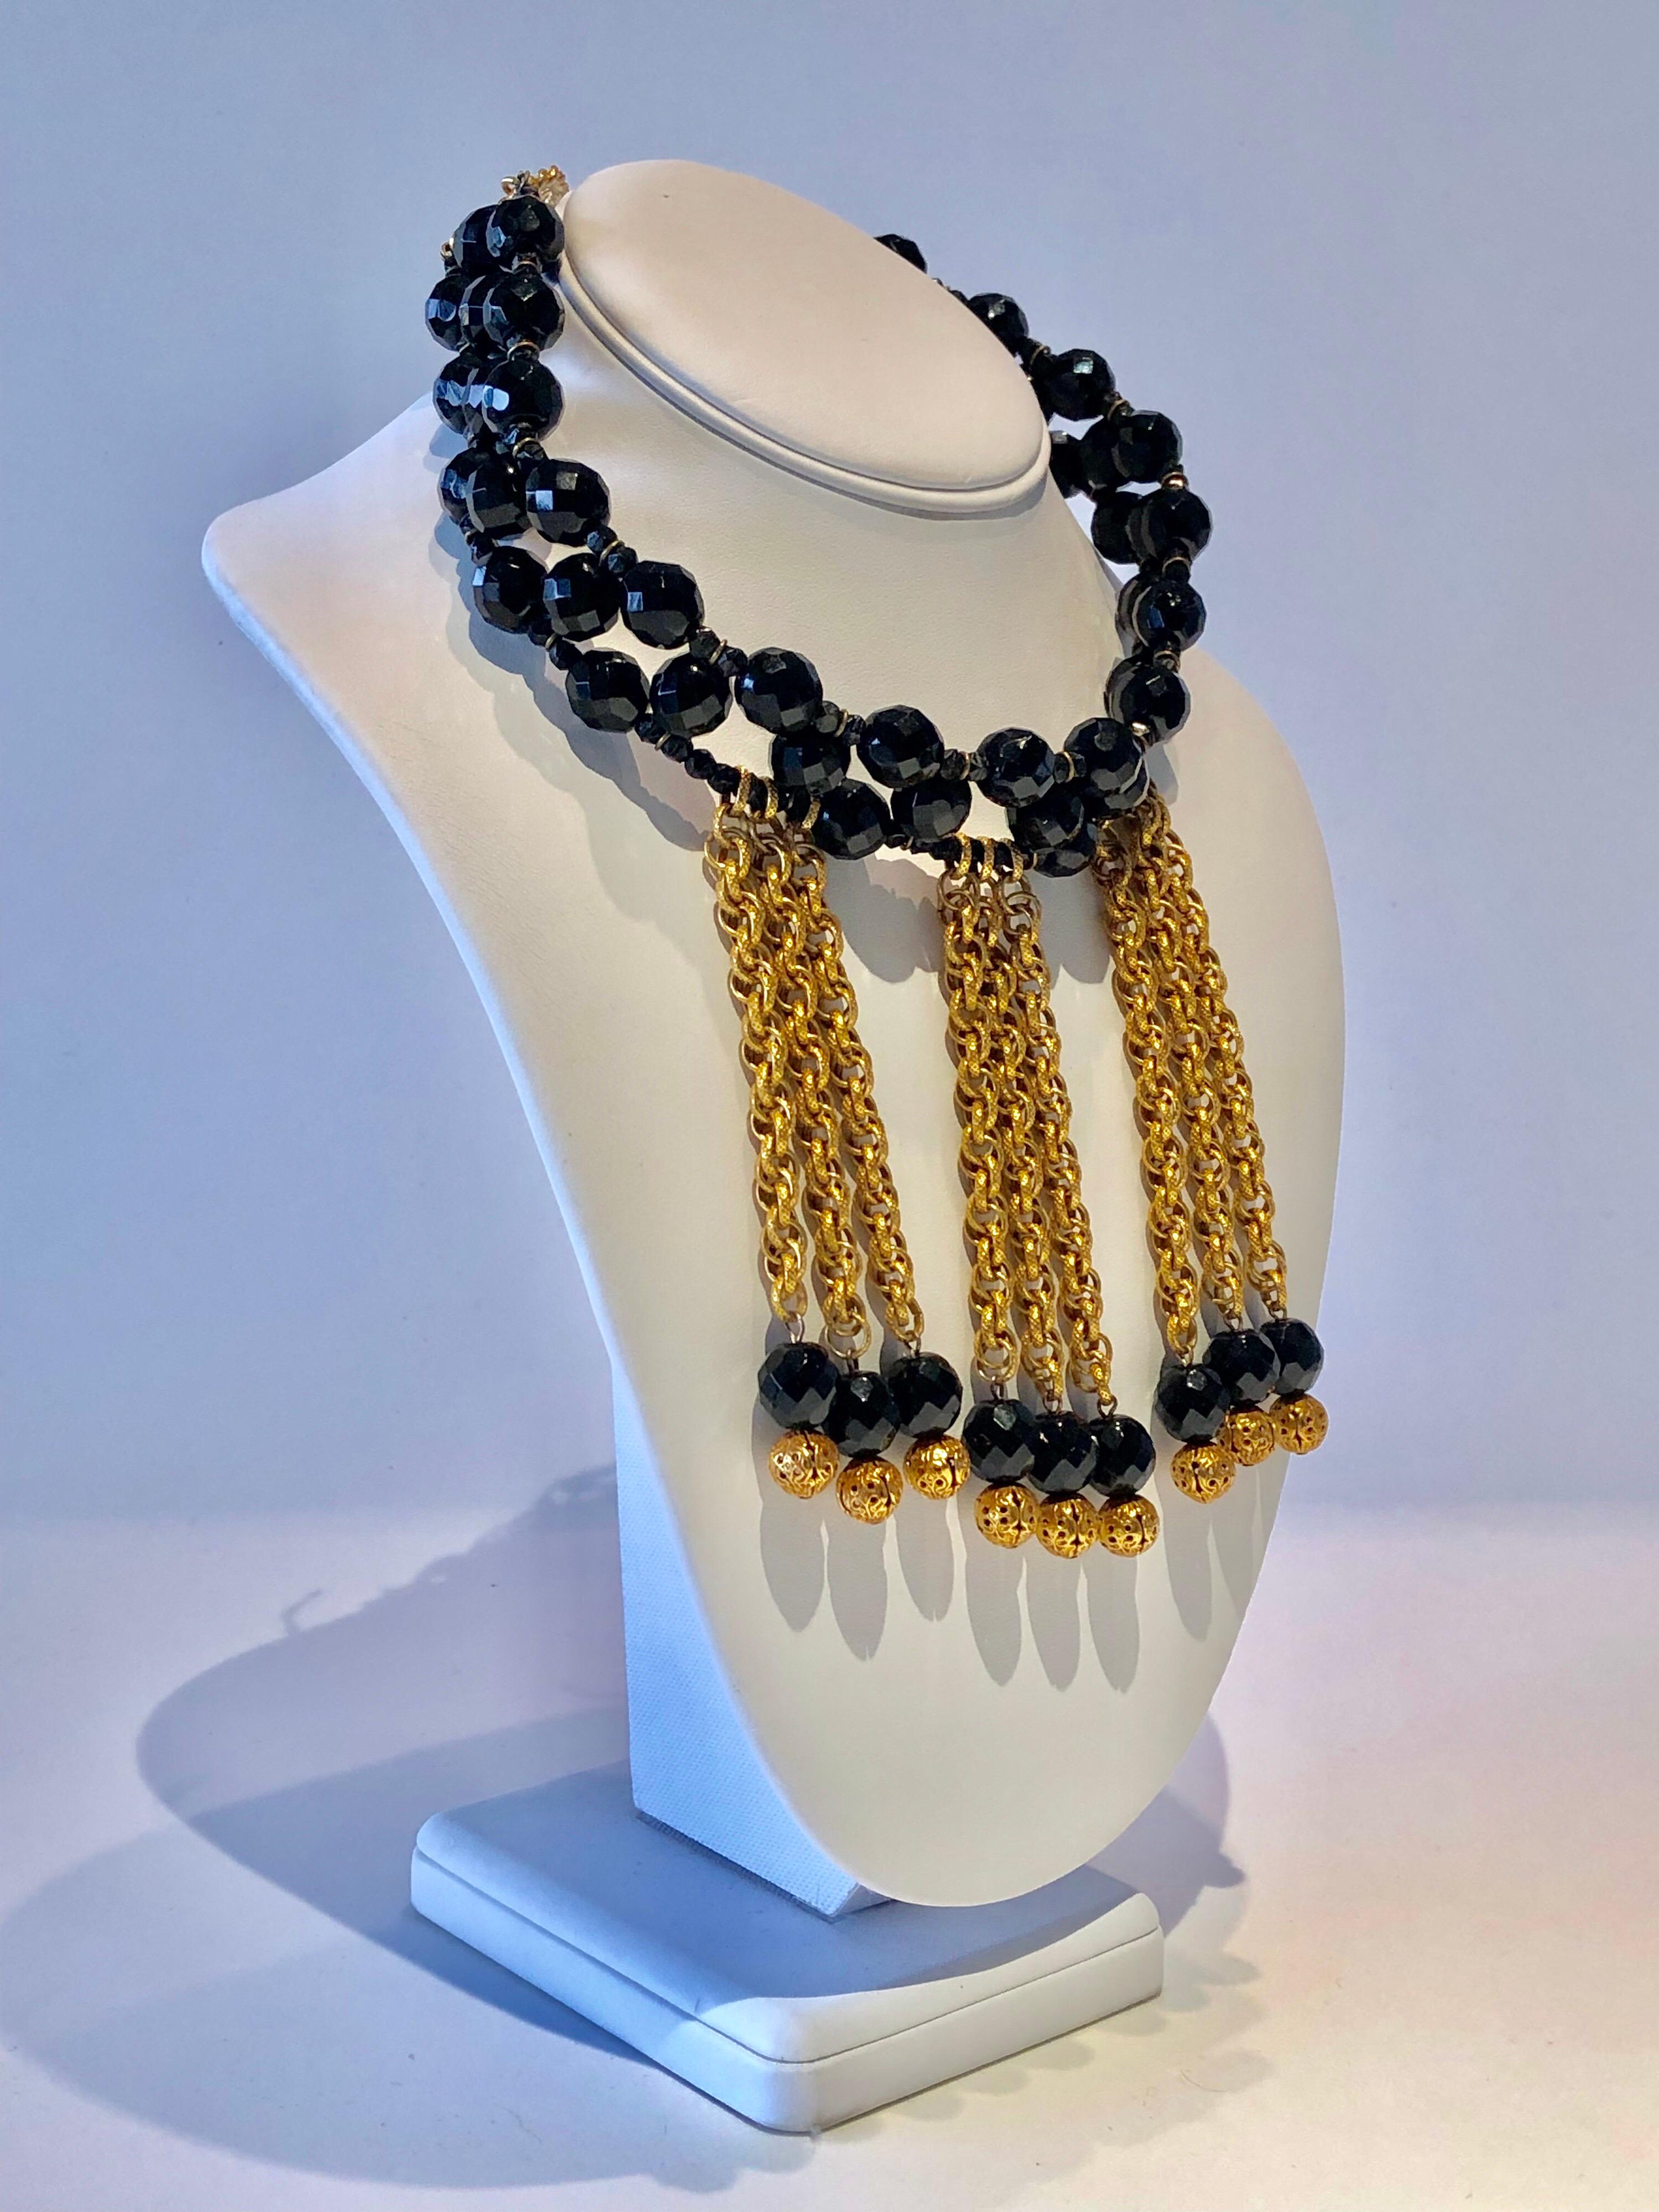 A rare find - vintage Christian Dior fringe statement bib necklace c.1973 - the chunky edgy and modern necklace is comprised of two rows of woven faceted jet crystal beads. The design is an example of Dior's experimentation of the 1970s when the